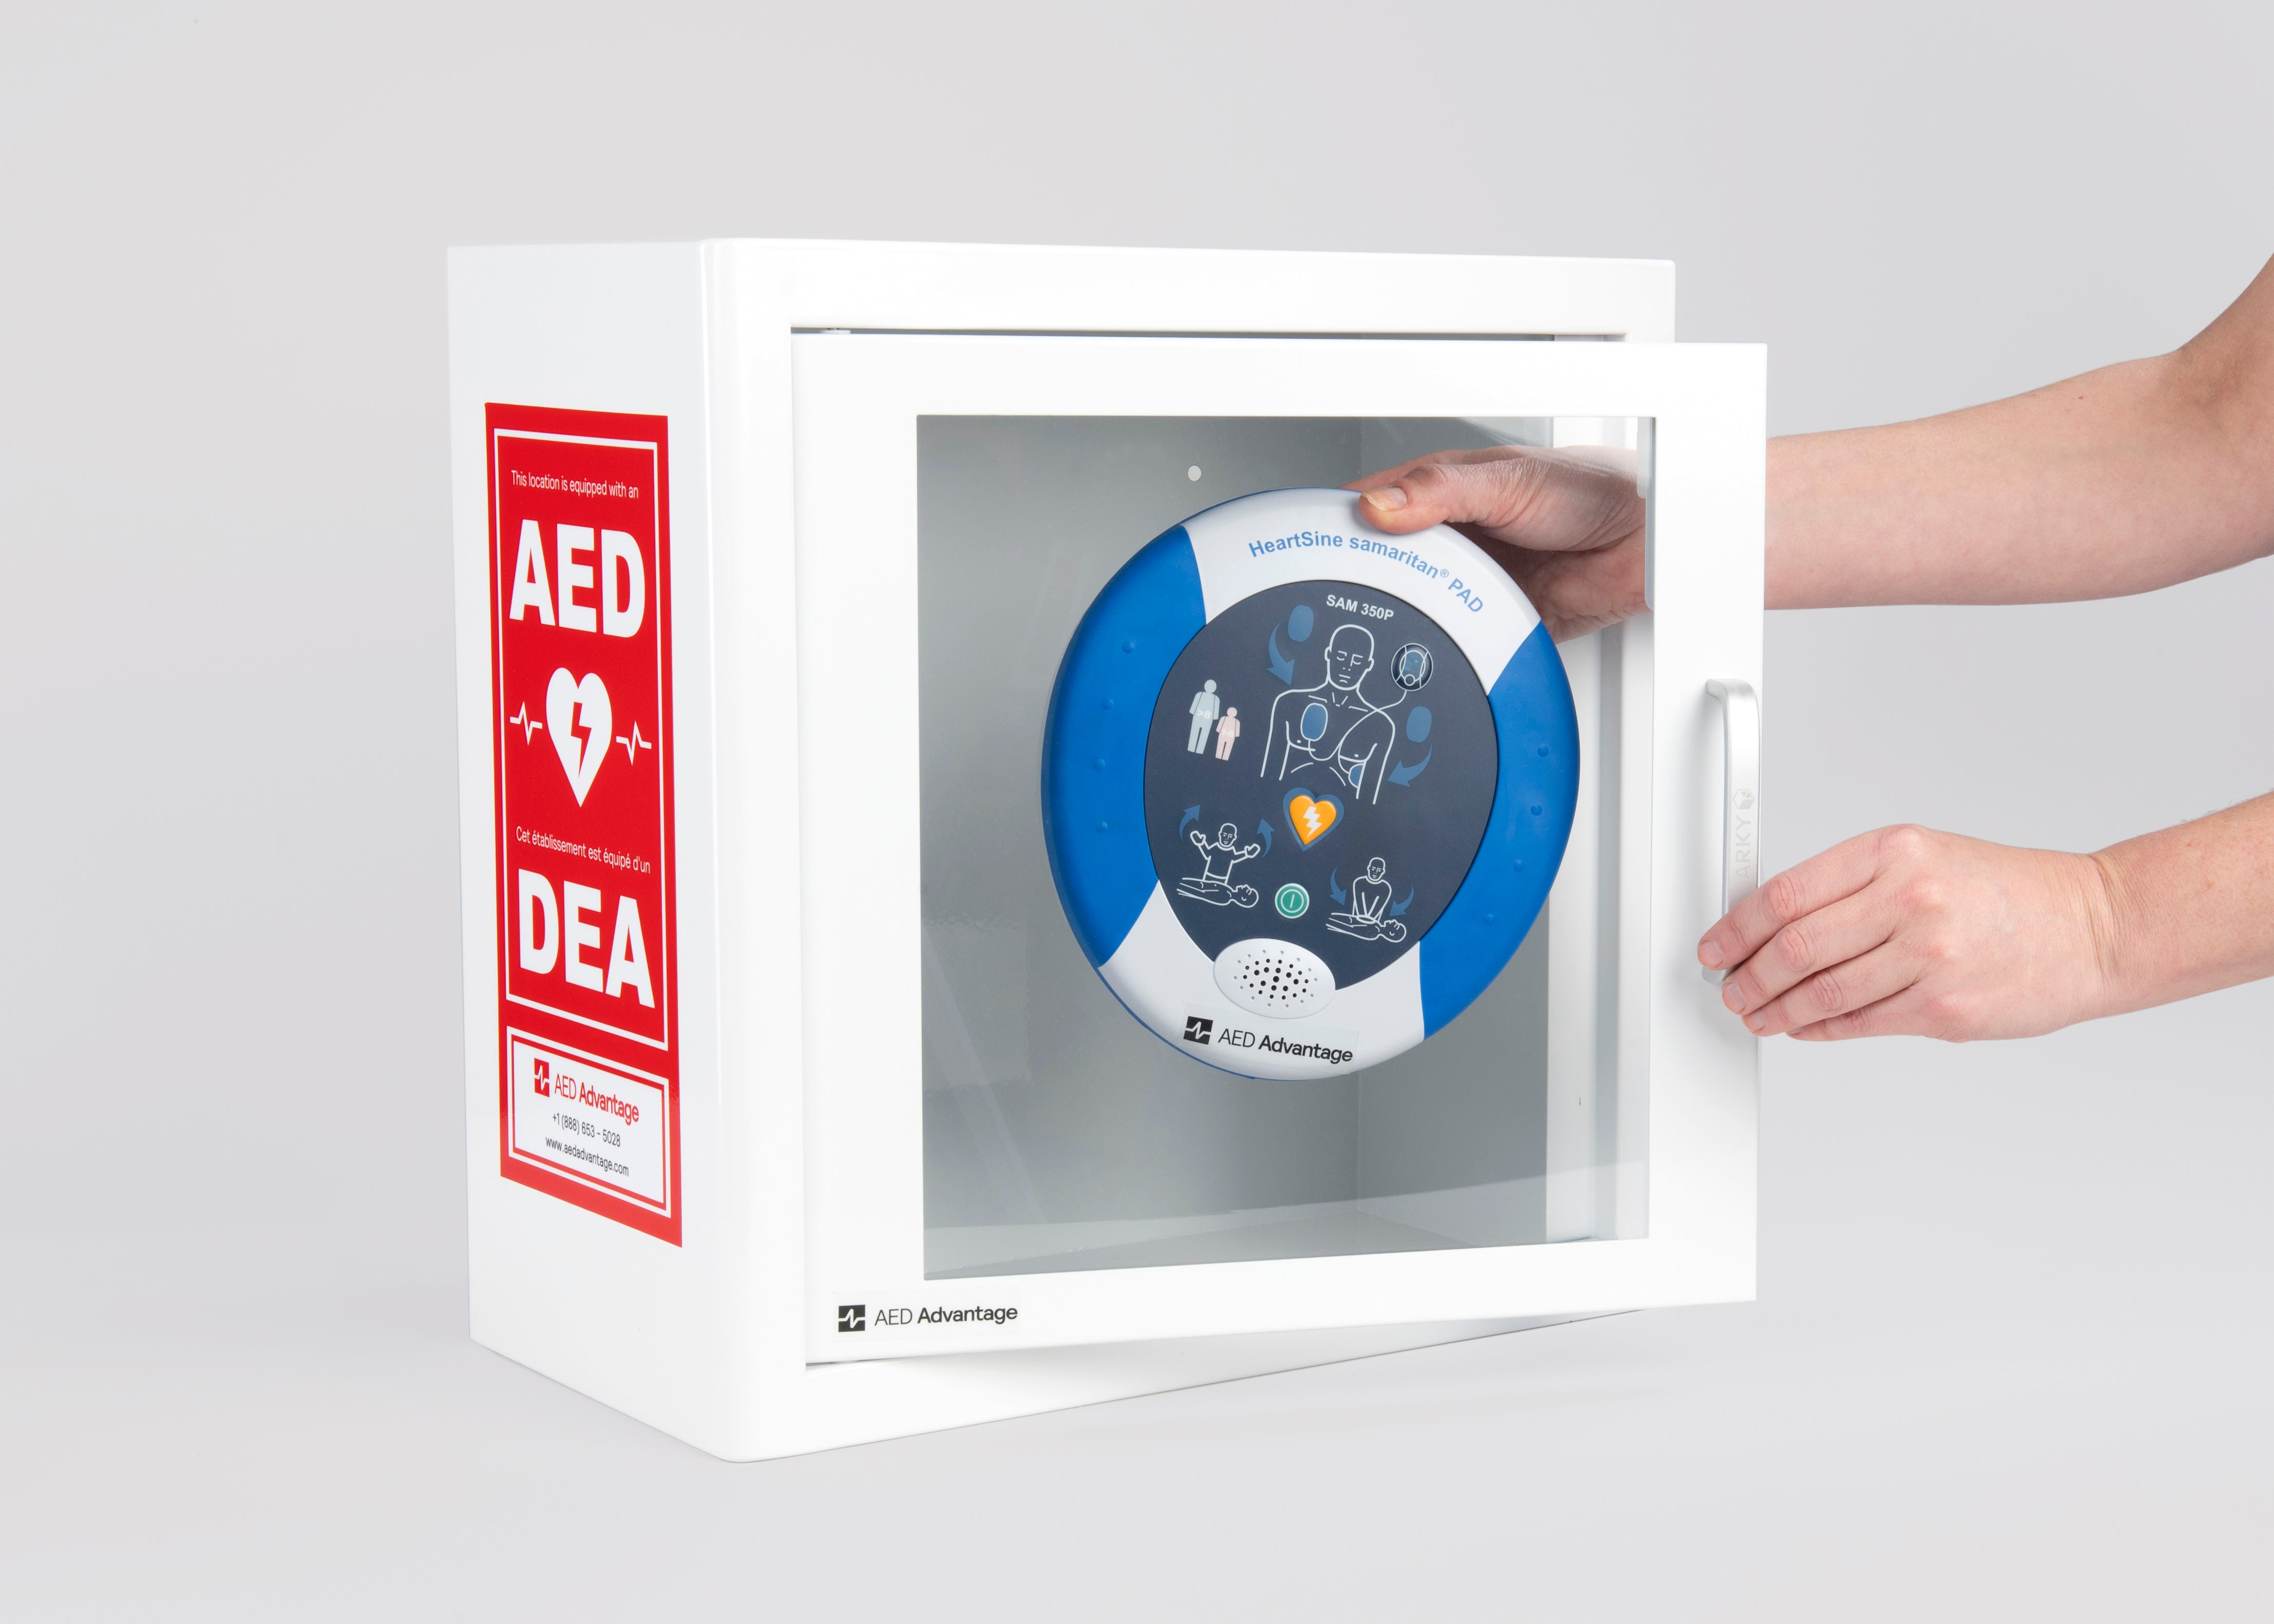 A blue and white HeartSine AED being retrieved by hand from a white metal cabinet with red decals